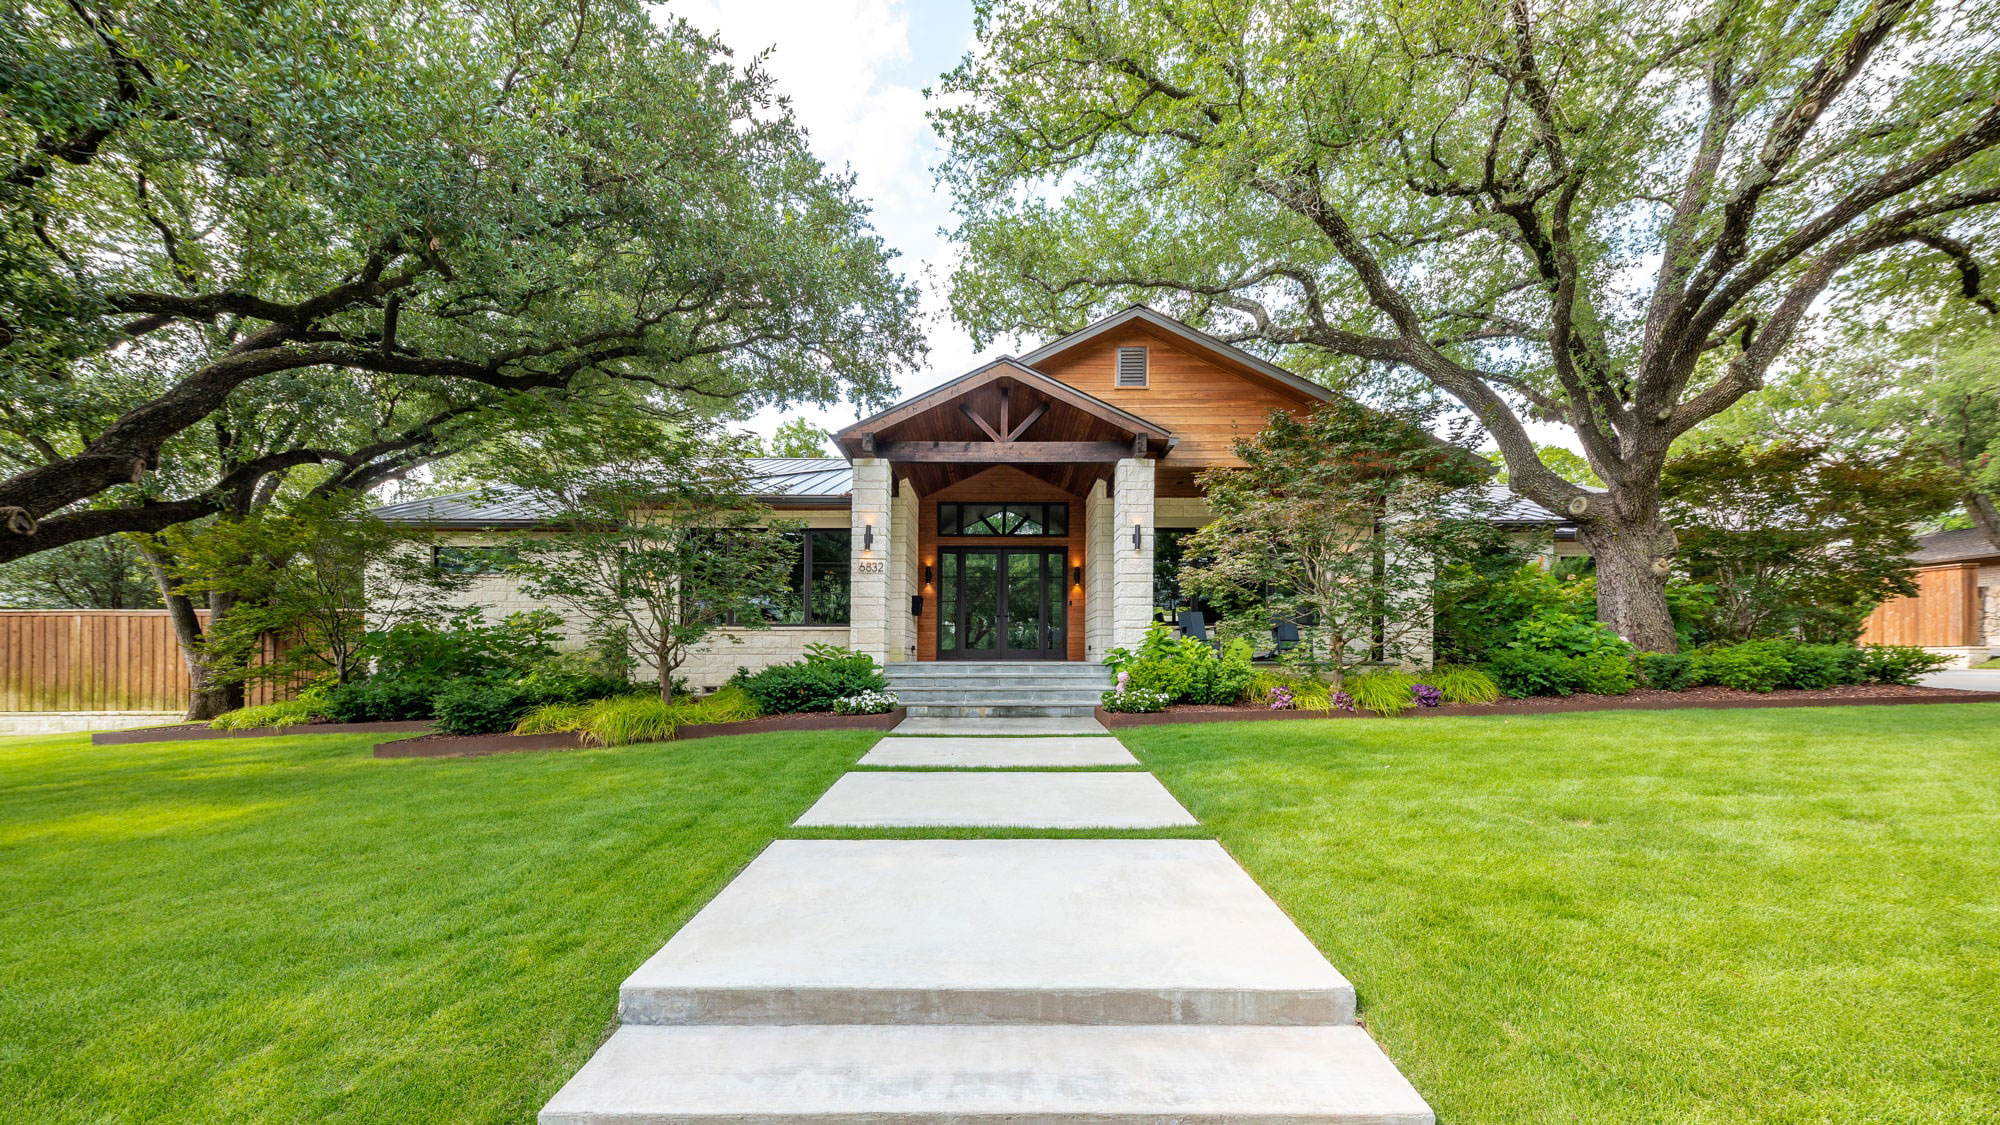 A modern home in Dallas, Texas, with a modern design & well maintained landscape.